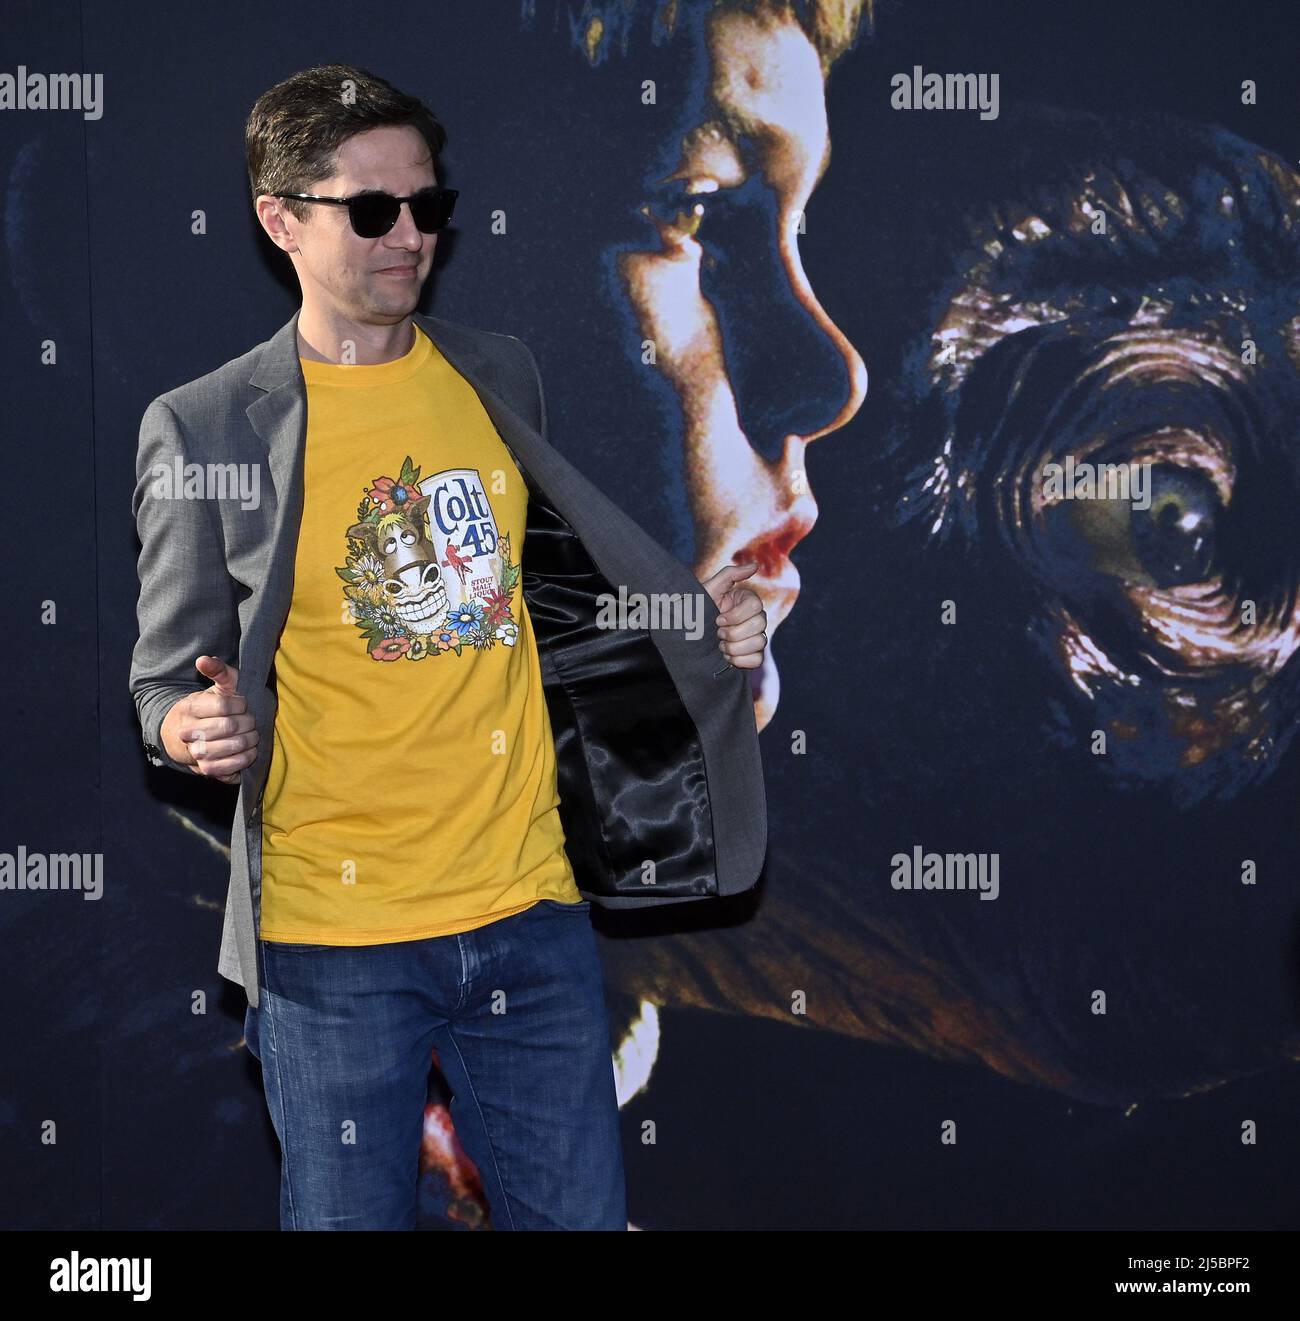 Los Angeles, USA. 22nd Apr, 2022. Topher Grace attends the 40th Anniversary Screening of 'E.T. the Extra-Terrestrial' presented on the Opening Night of the 2022 TCM Classic Film Festival at the TCL Chinese Theater in the Hollywood section of Los Angeles on Thursday, April 21, 2022. Photo by Jim Ruymen/UPI Credit: UPI/Alamy Live News Stock Photo